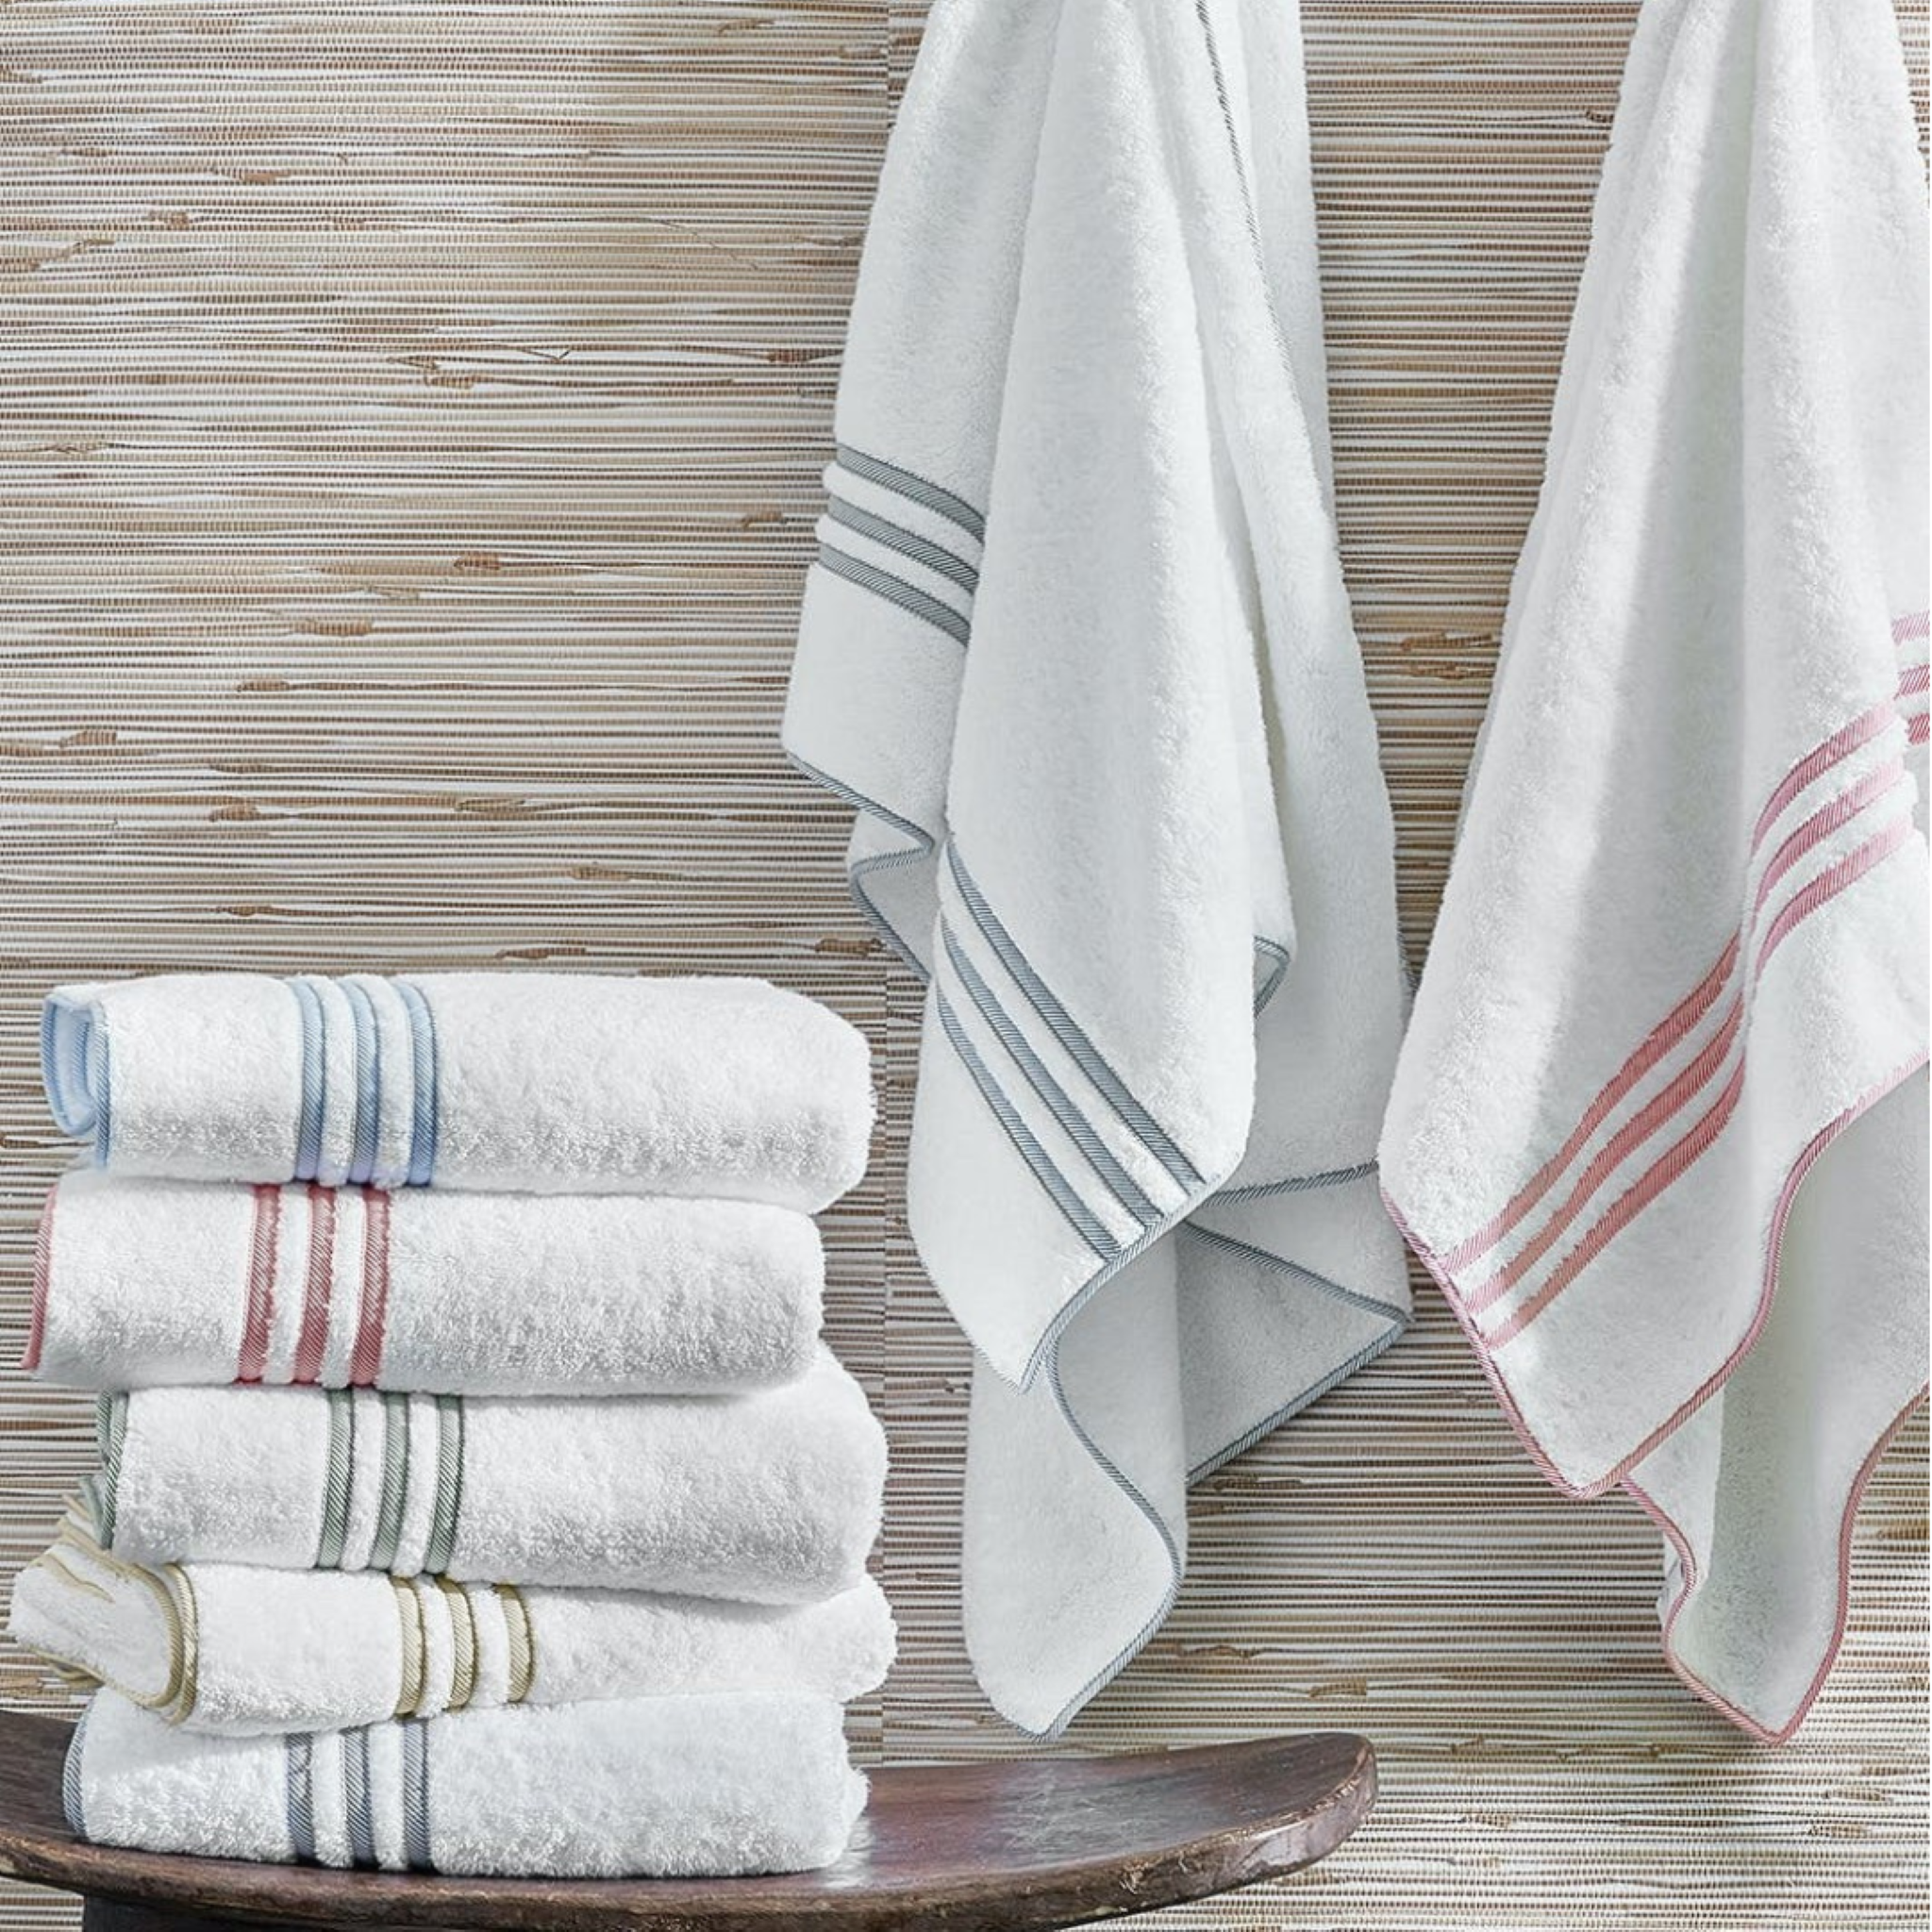 Linens Of Distinction Dish Towel Pink, Gray And Yellow Stripes